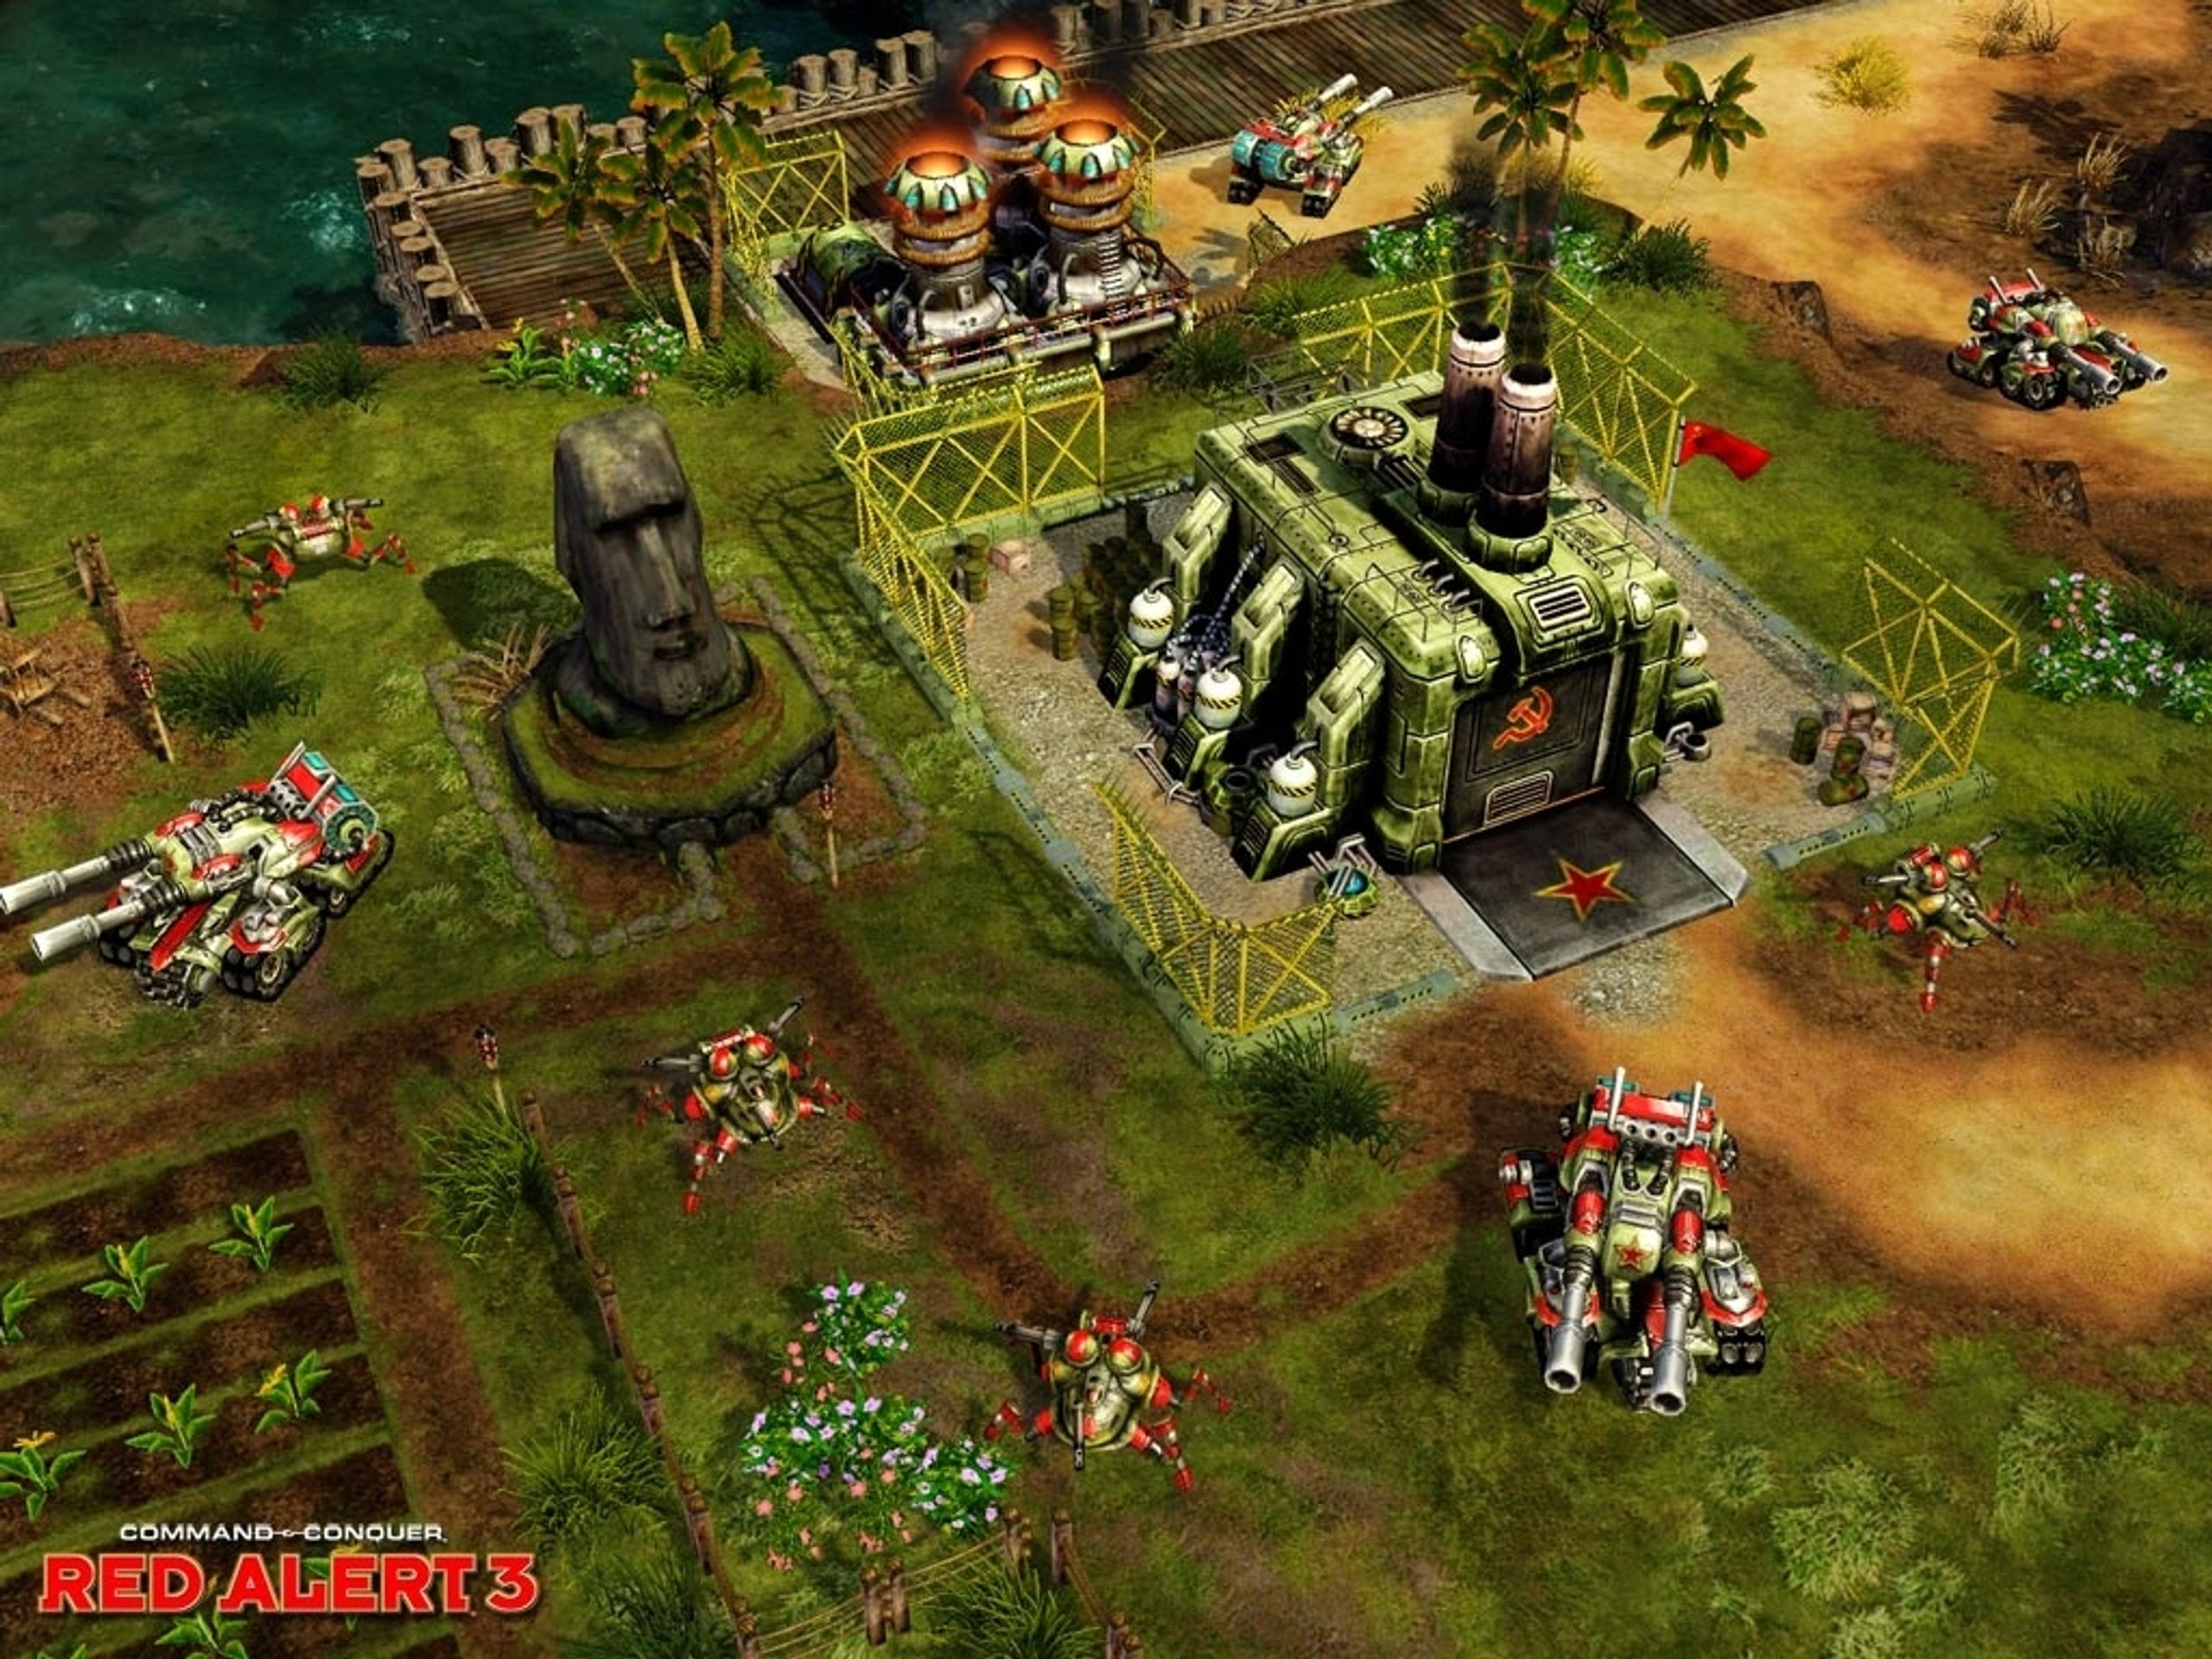 Command & Conquer: Red Alert 3 - Red Alert 3 galerie (16/16)